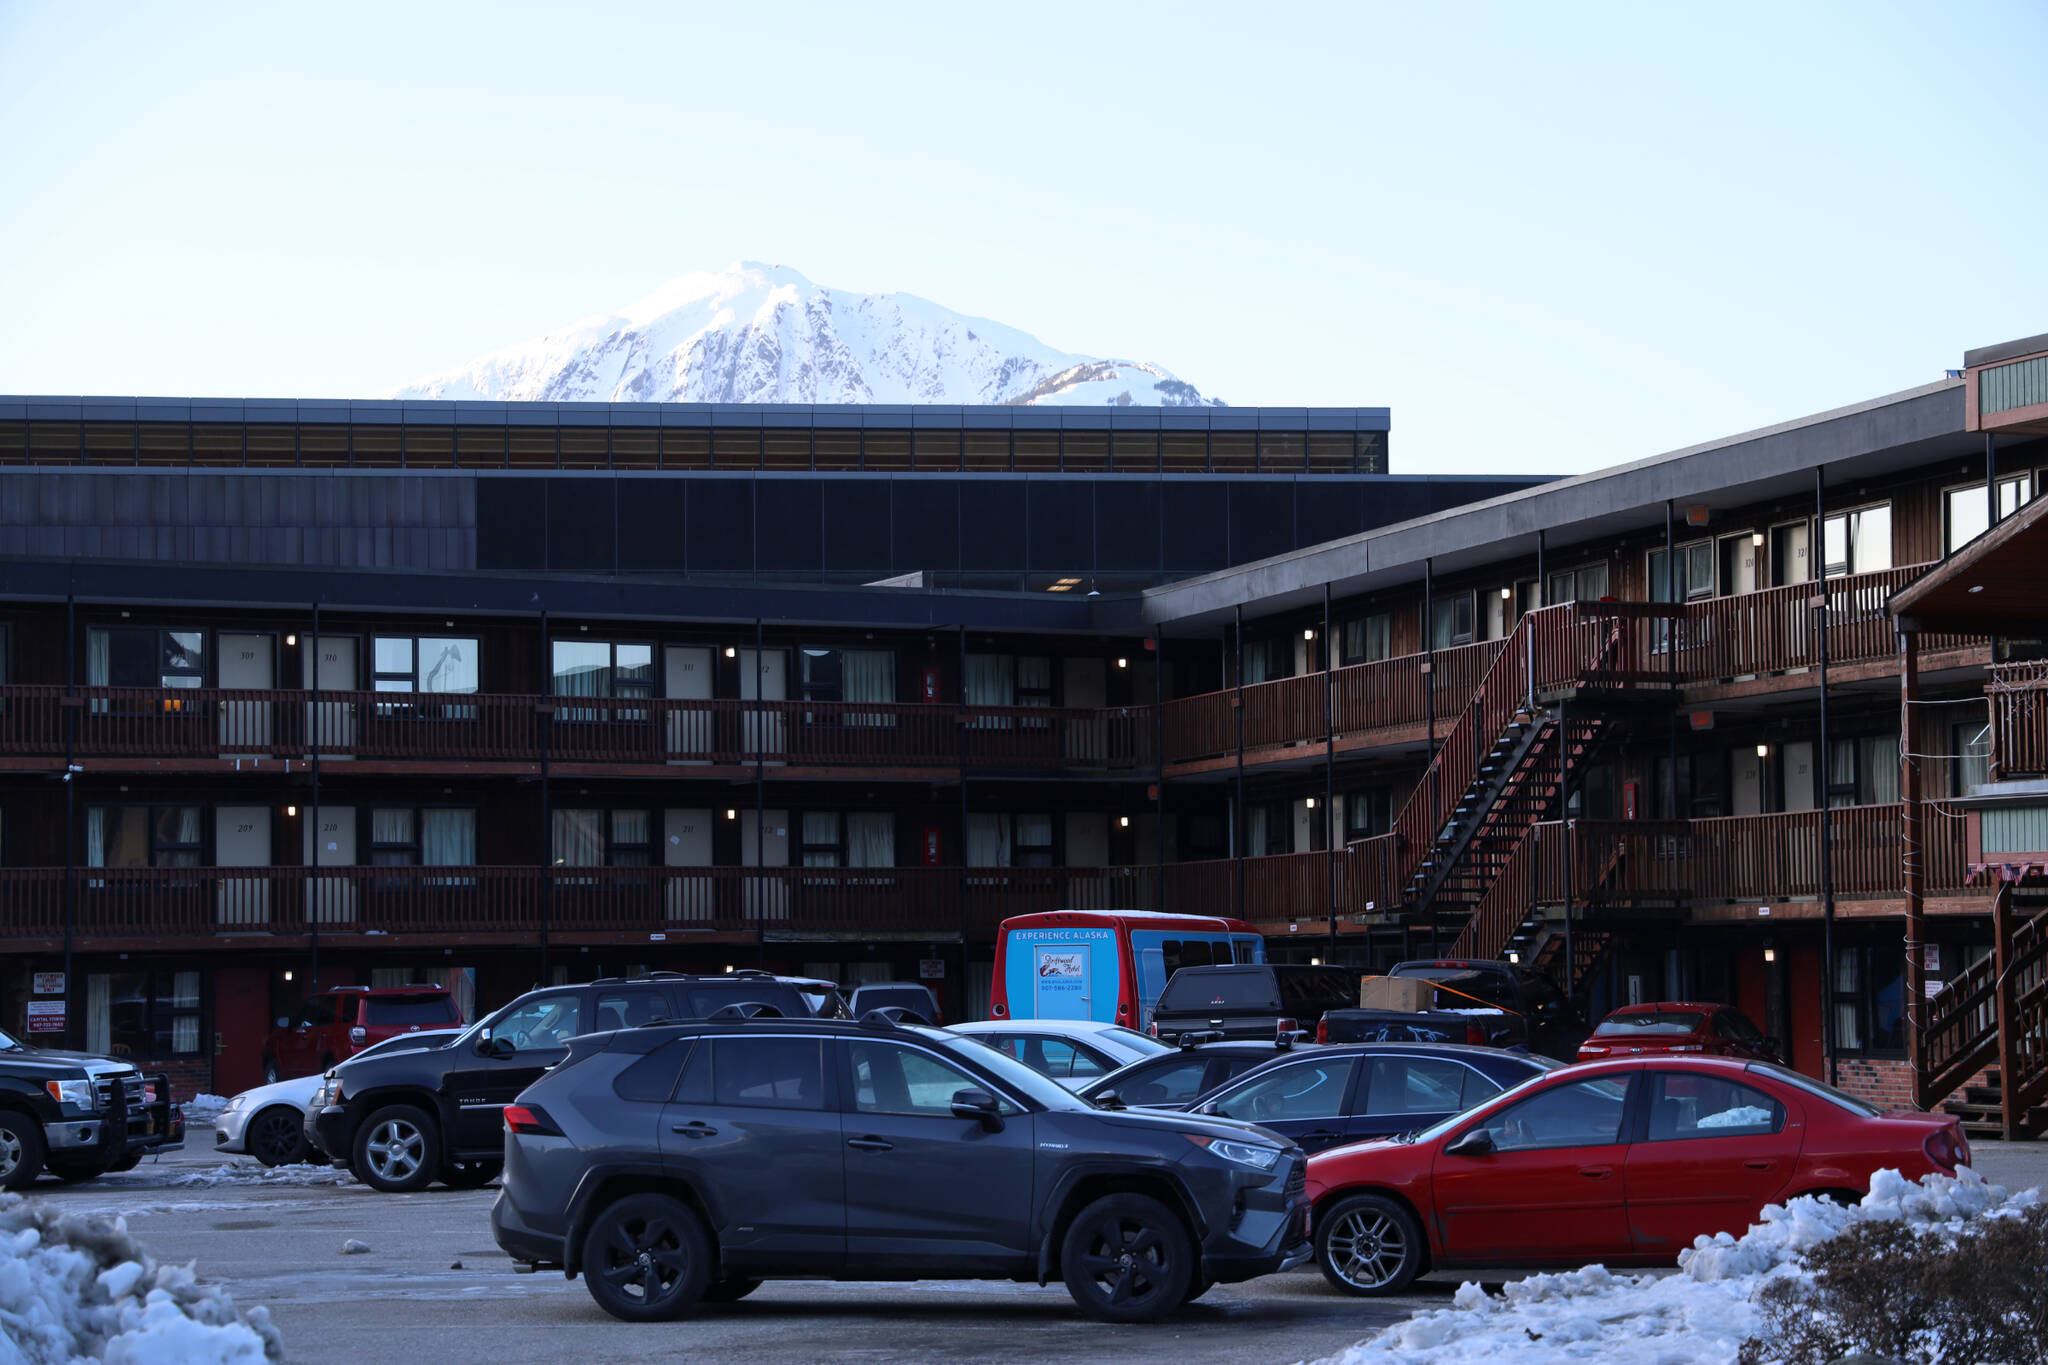 Cars fill the parking lot outside of Driftwood Lodge in downtown Juneau Monday morning. The Central Council of the Tlingit and Haida Indian Tribes of Alaska recently announced it’s purchase of the site. (Clarise Larson / Juneau Empire)